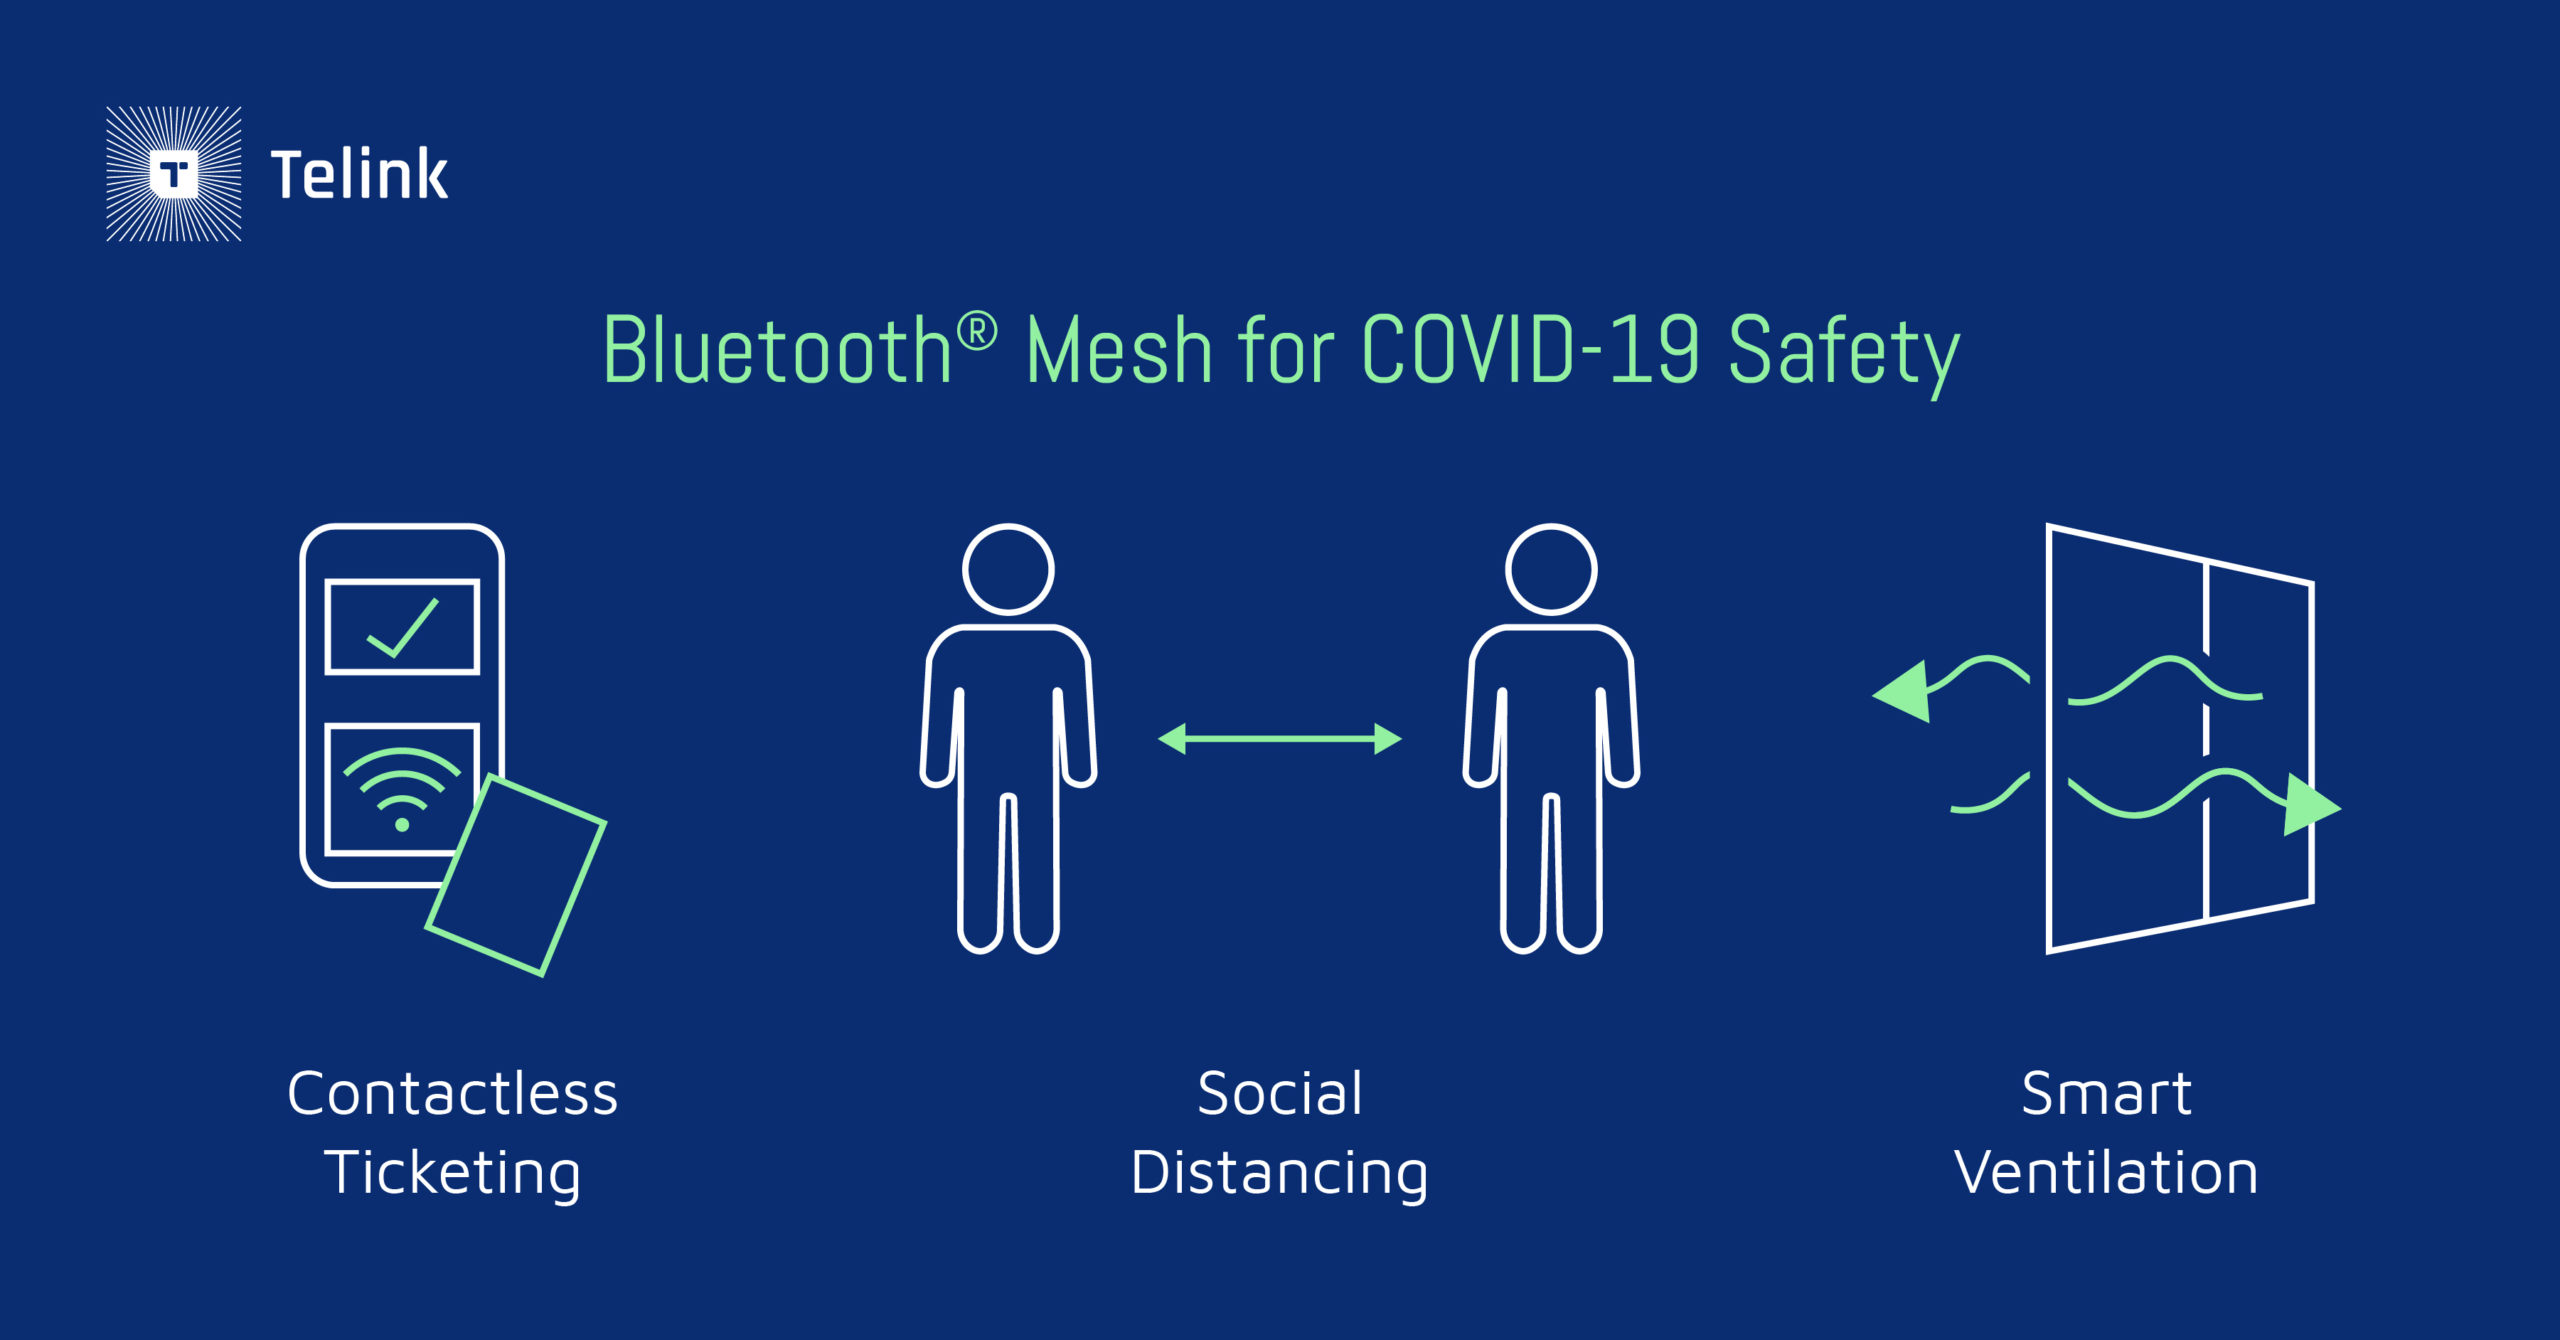 Bluetooth Mesh for COVID-19 Safety